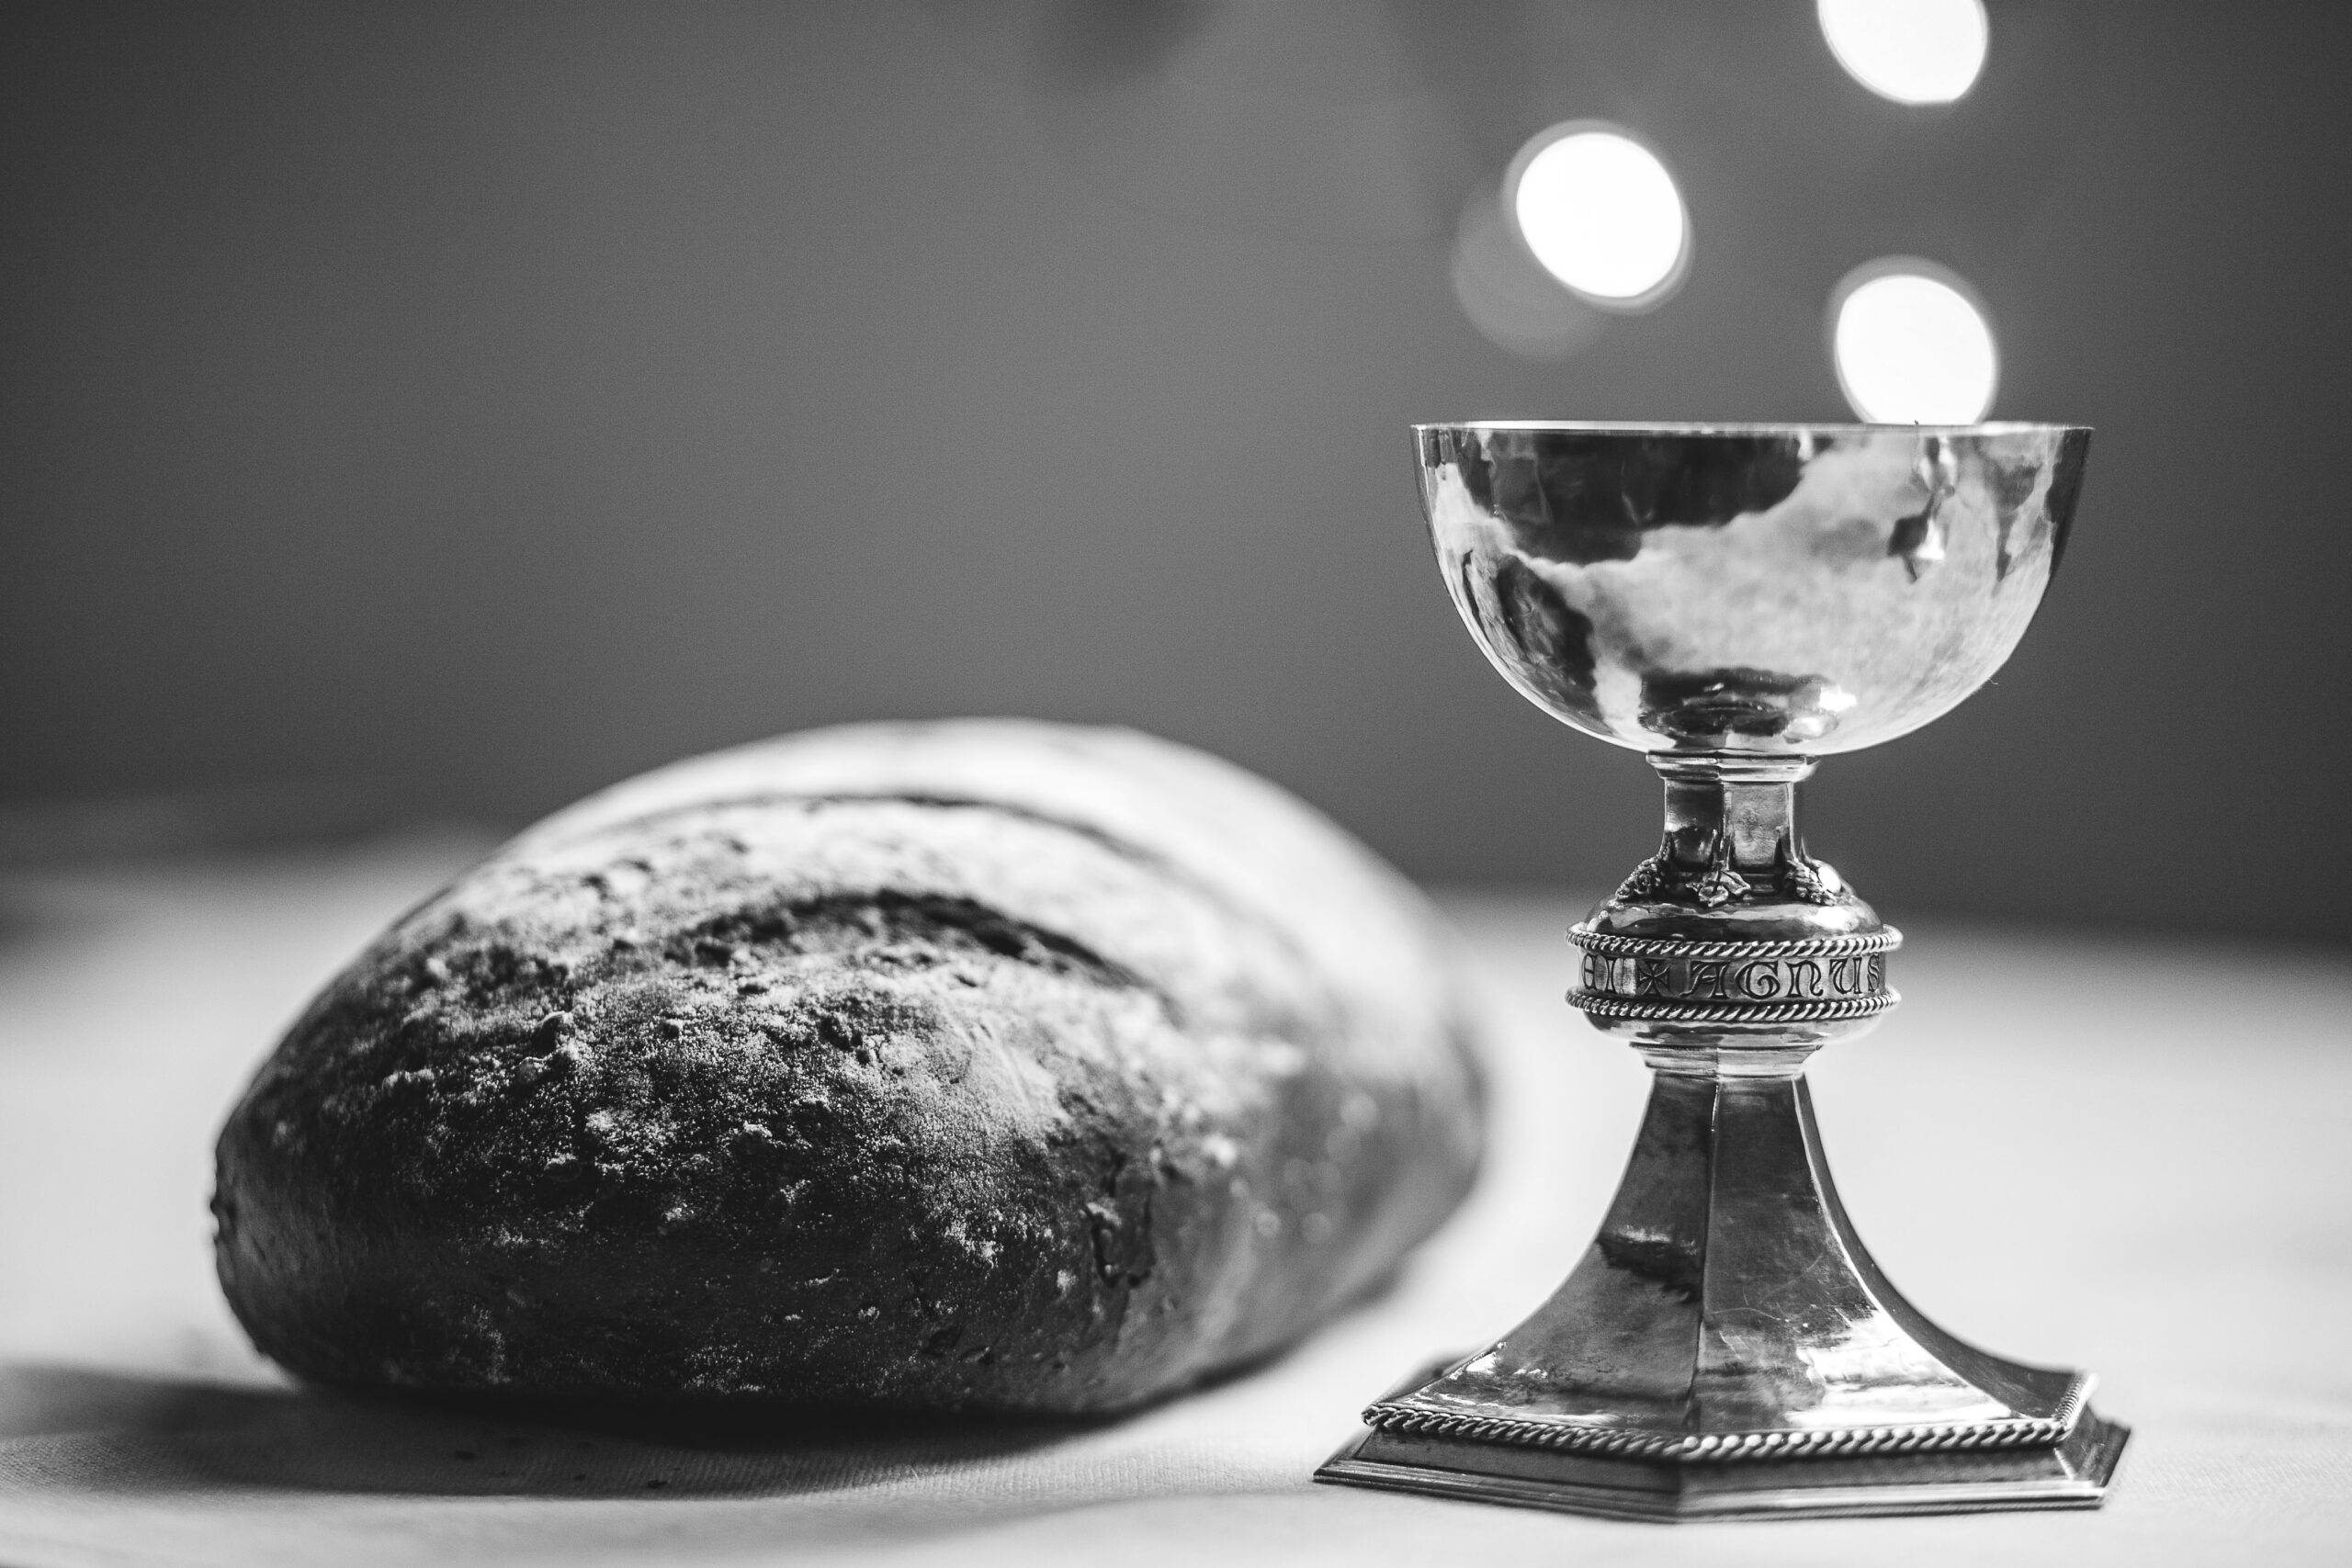 Bread and Wine on Communion Table